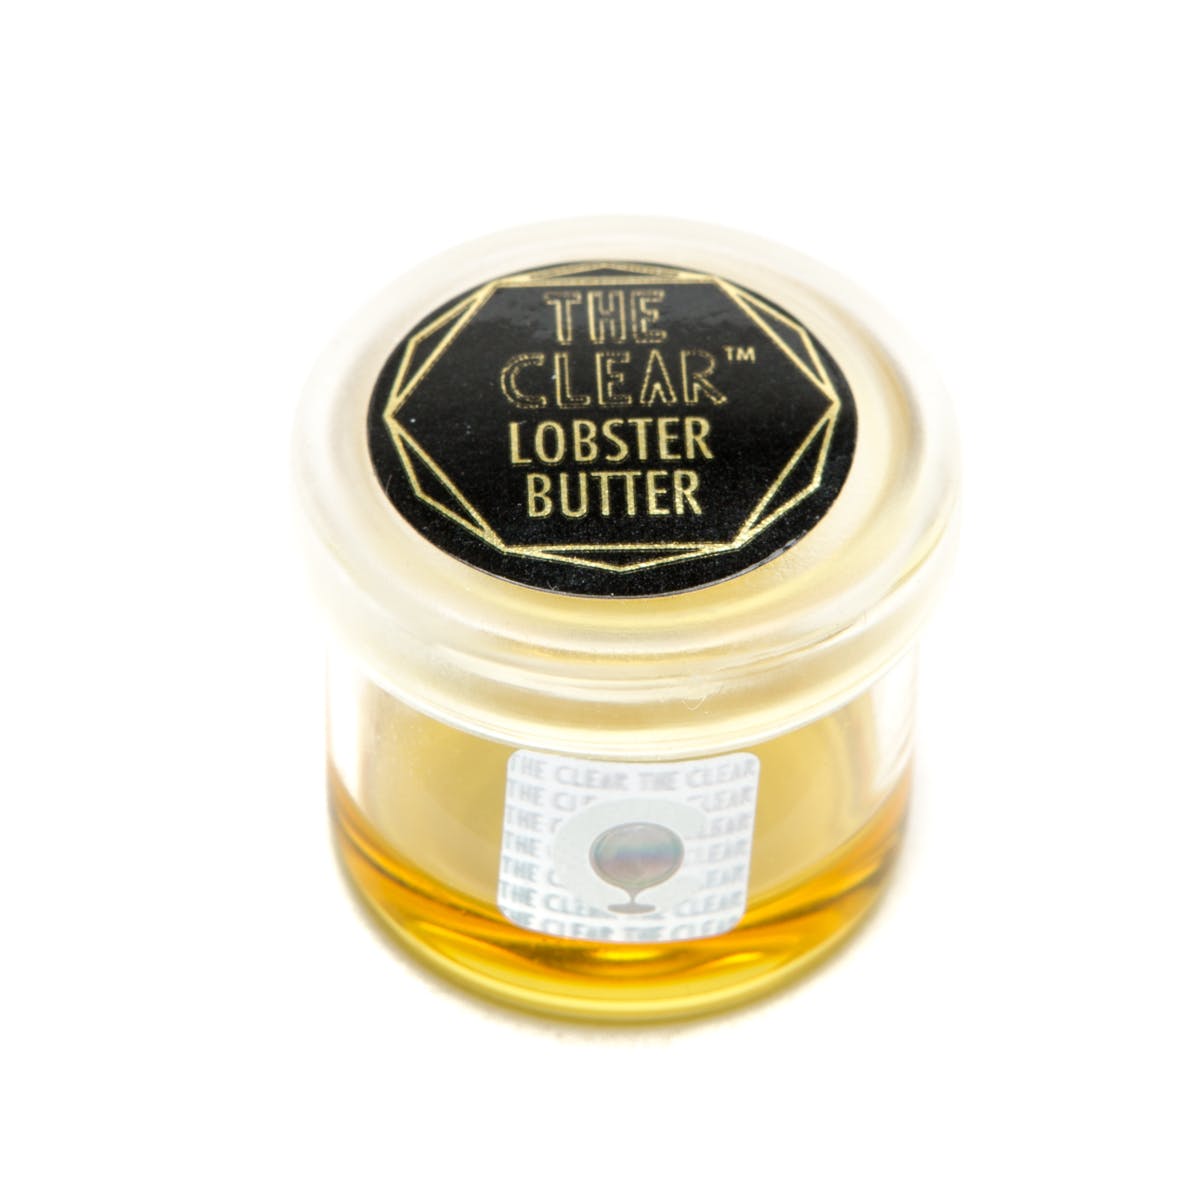 concentrate-the-clear-honey-bucket-lobster-butter-2c-1g